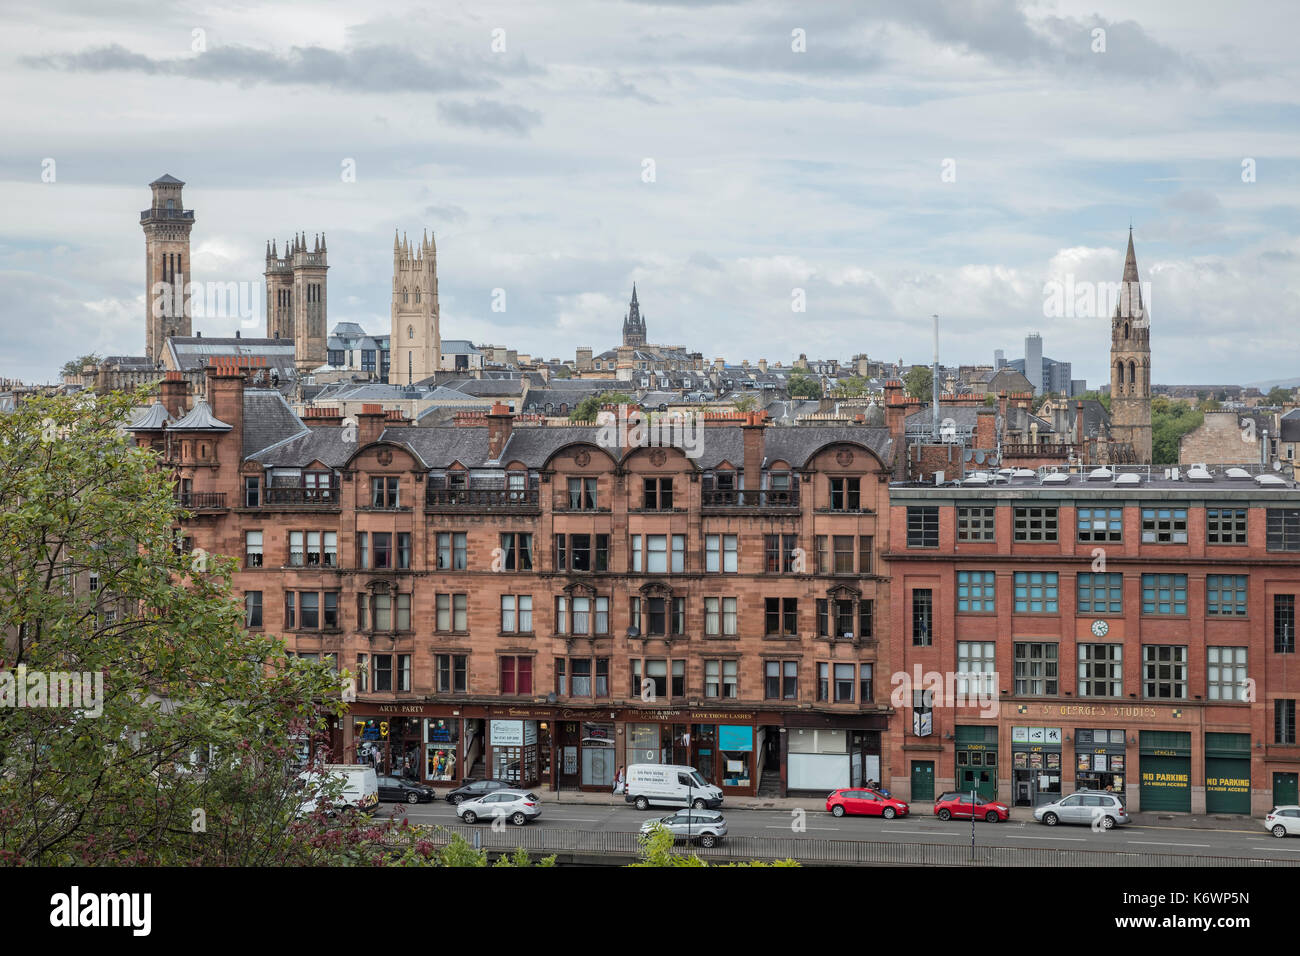 Great view of the city of Glasgow Stock Photo